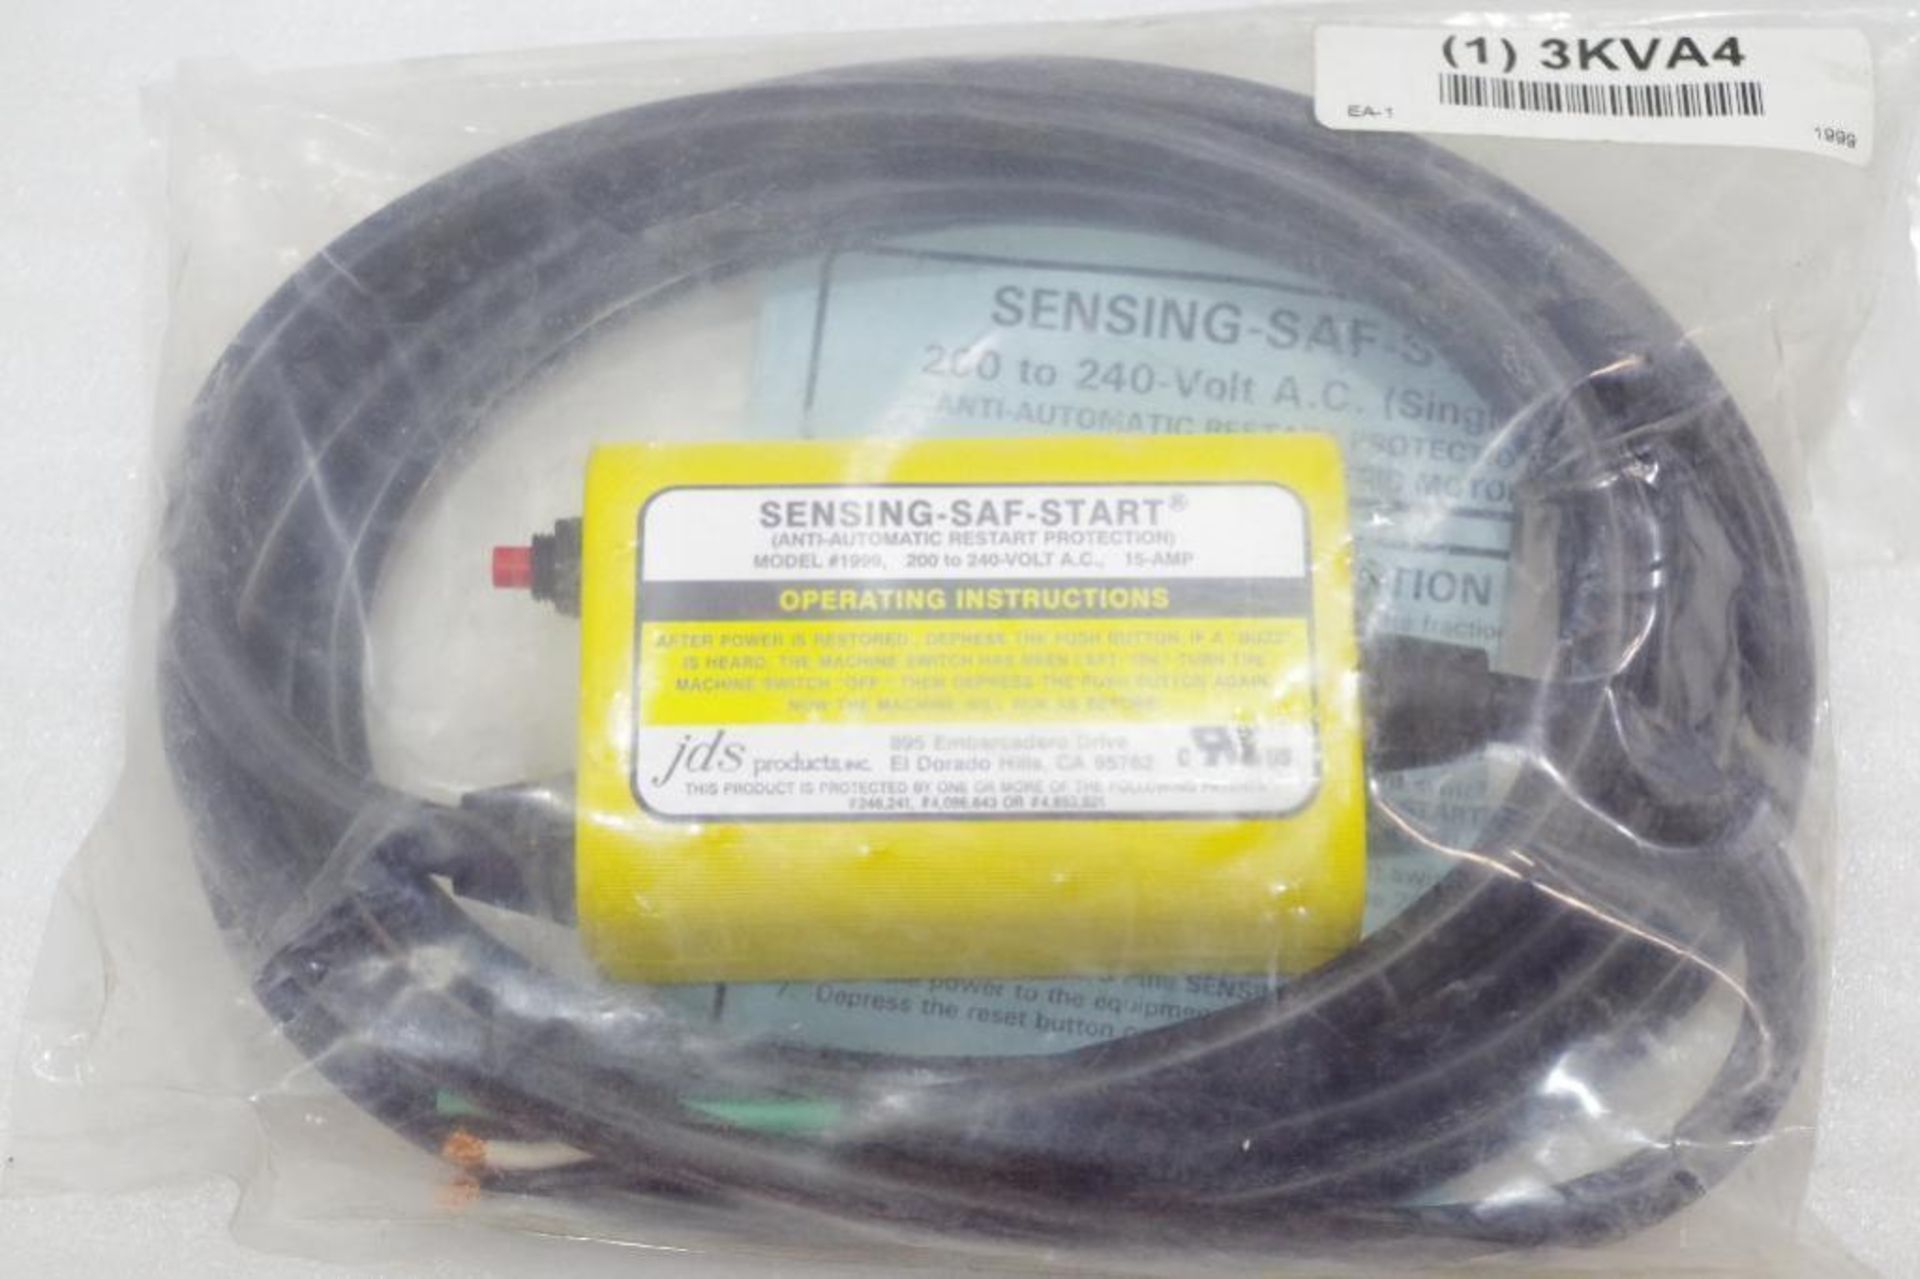 9.6' Power Cord with SJTO NEC Cord Designation, 14/3 Gauge/Conductor, and 15 Max. Amps